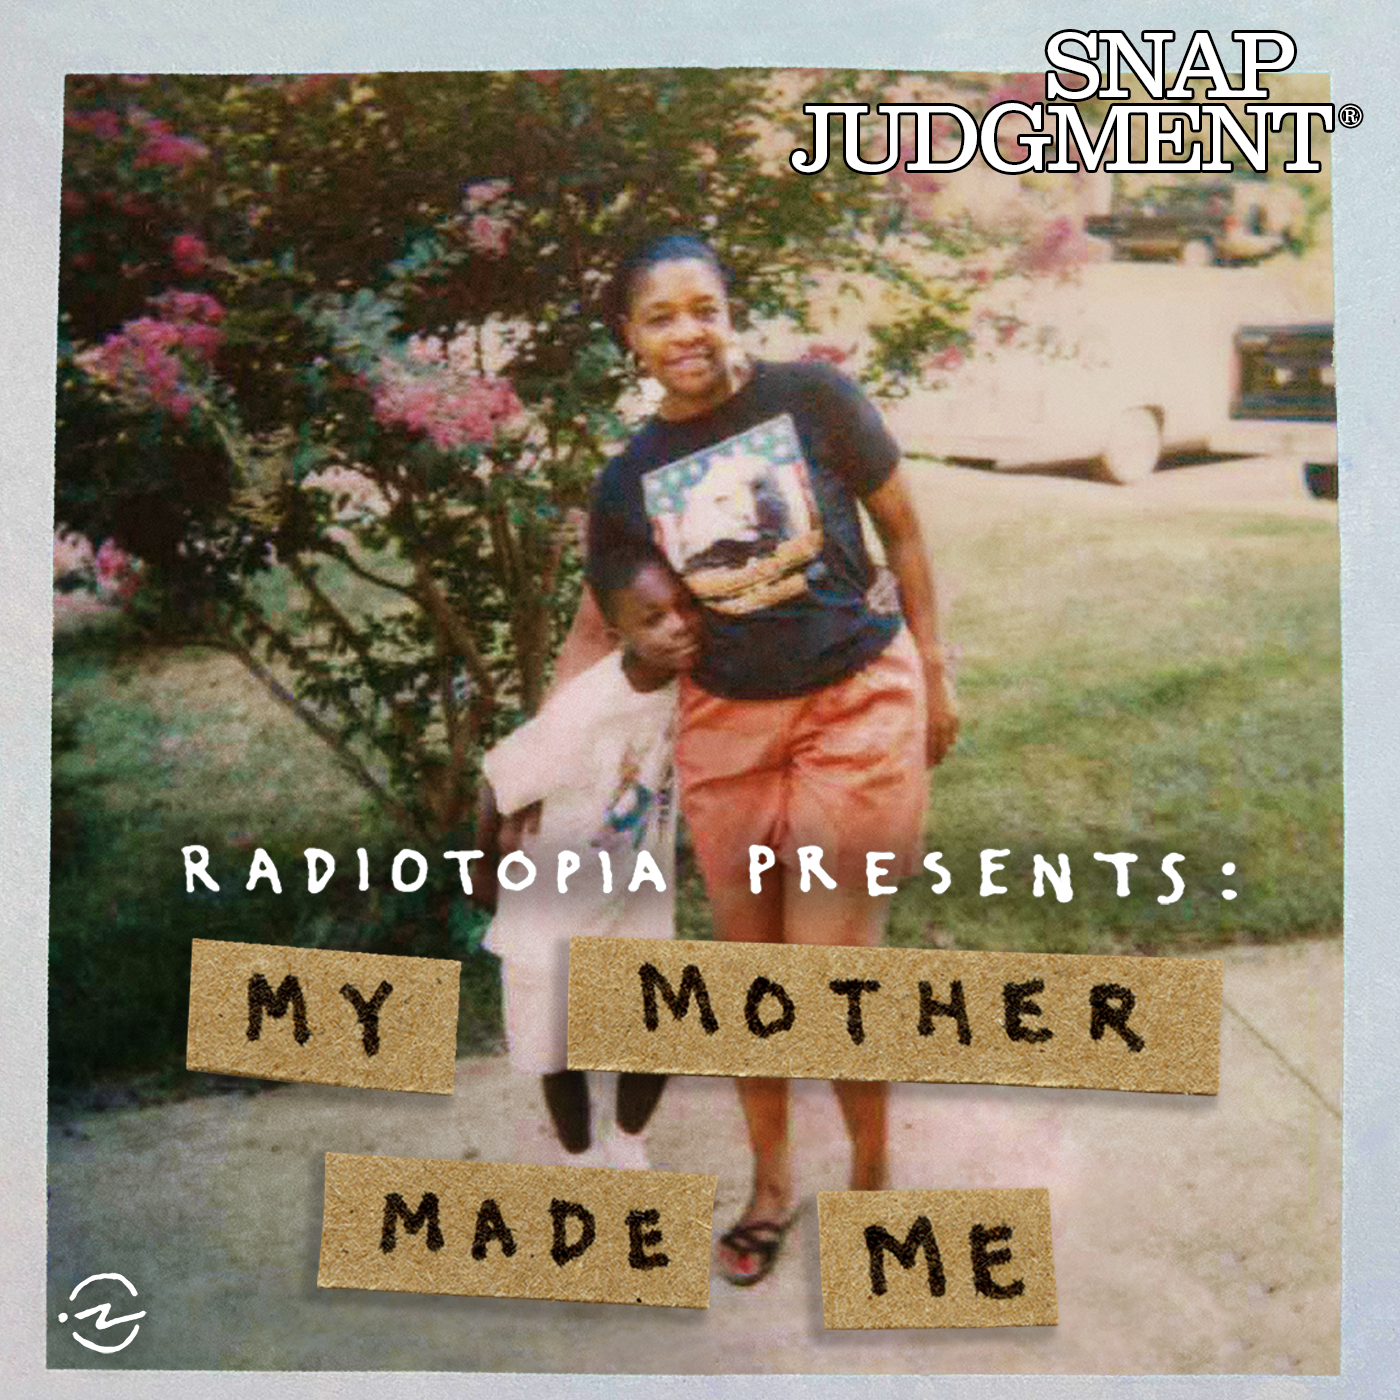 Thumbnail for "My Mother Made Me from Radiotopia Presents ".